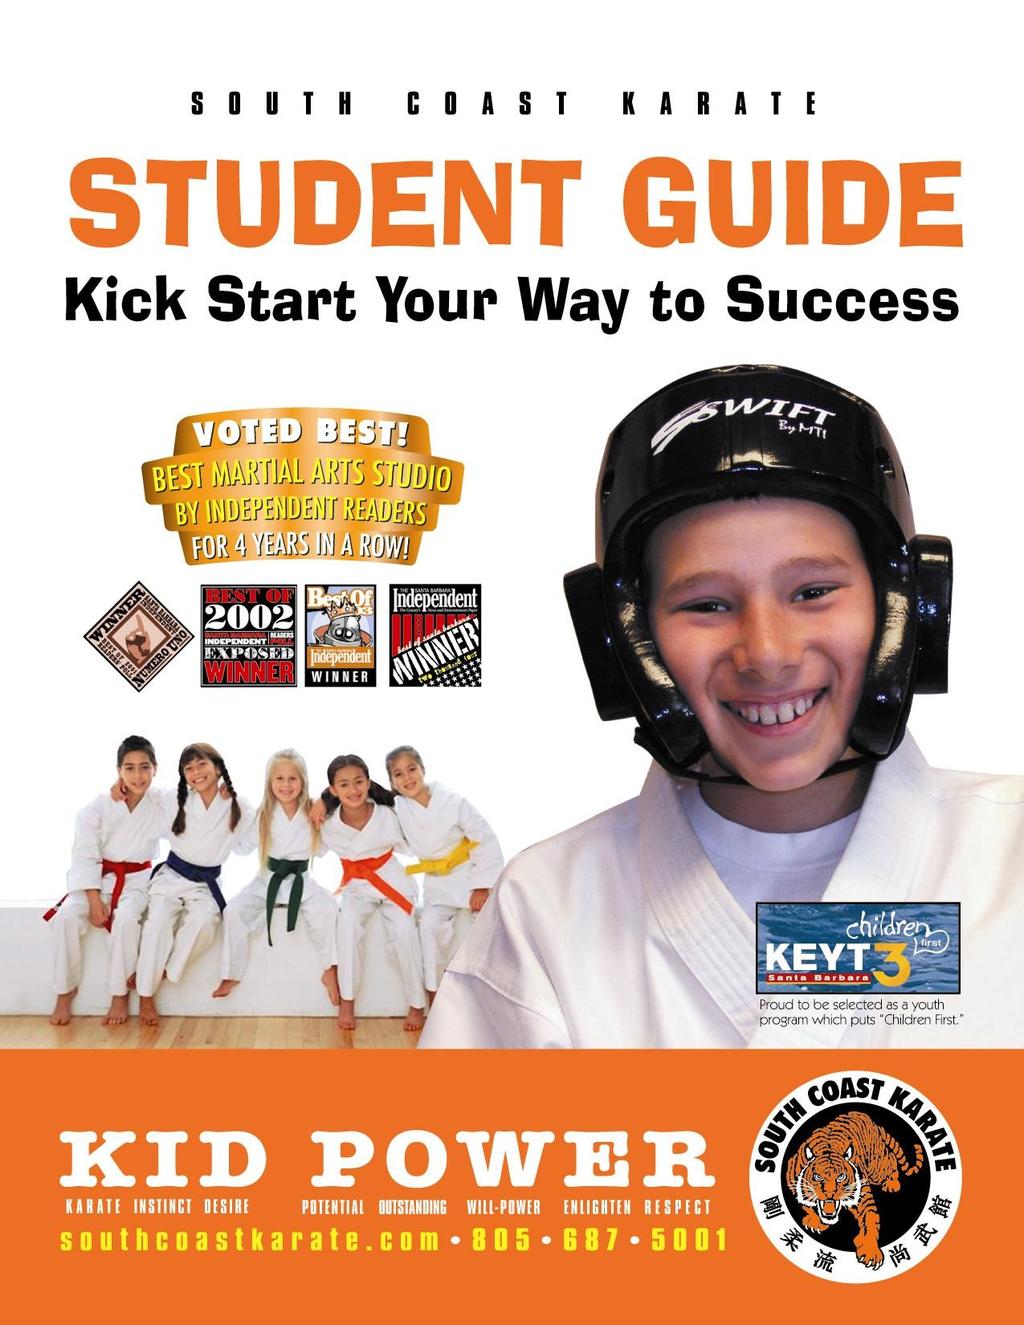 With the help and knowledge of our students and their families I m proud to present our first welcome guide. I hope our Kick Start To success Guide becomes a helpful tool for all of us.